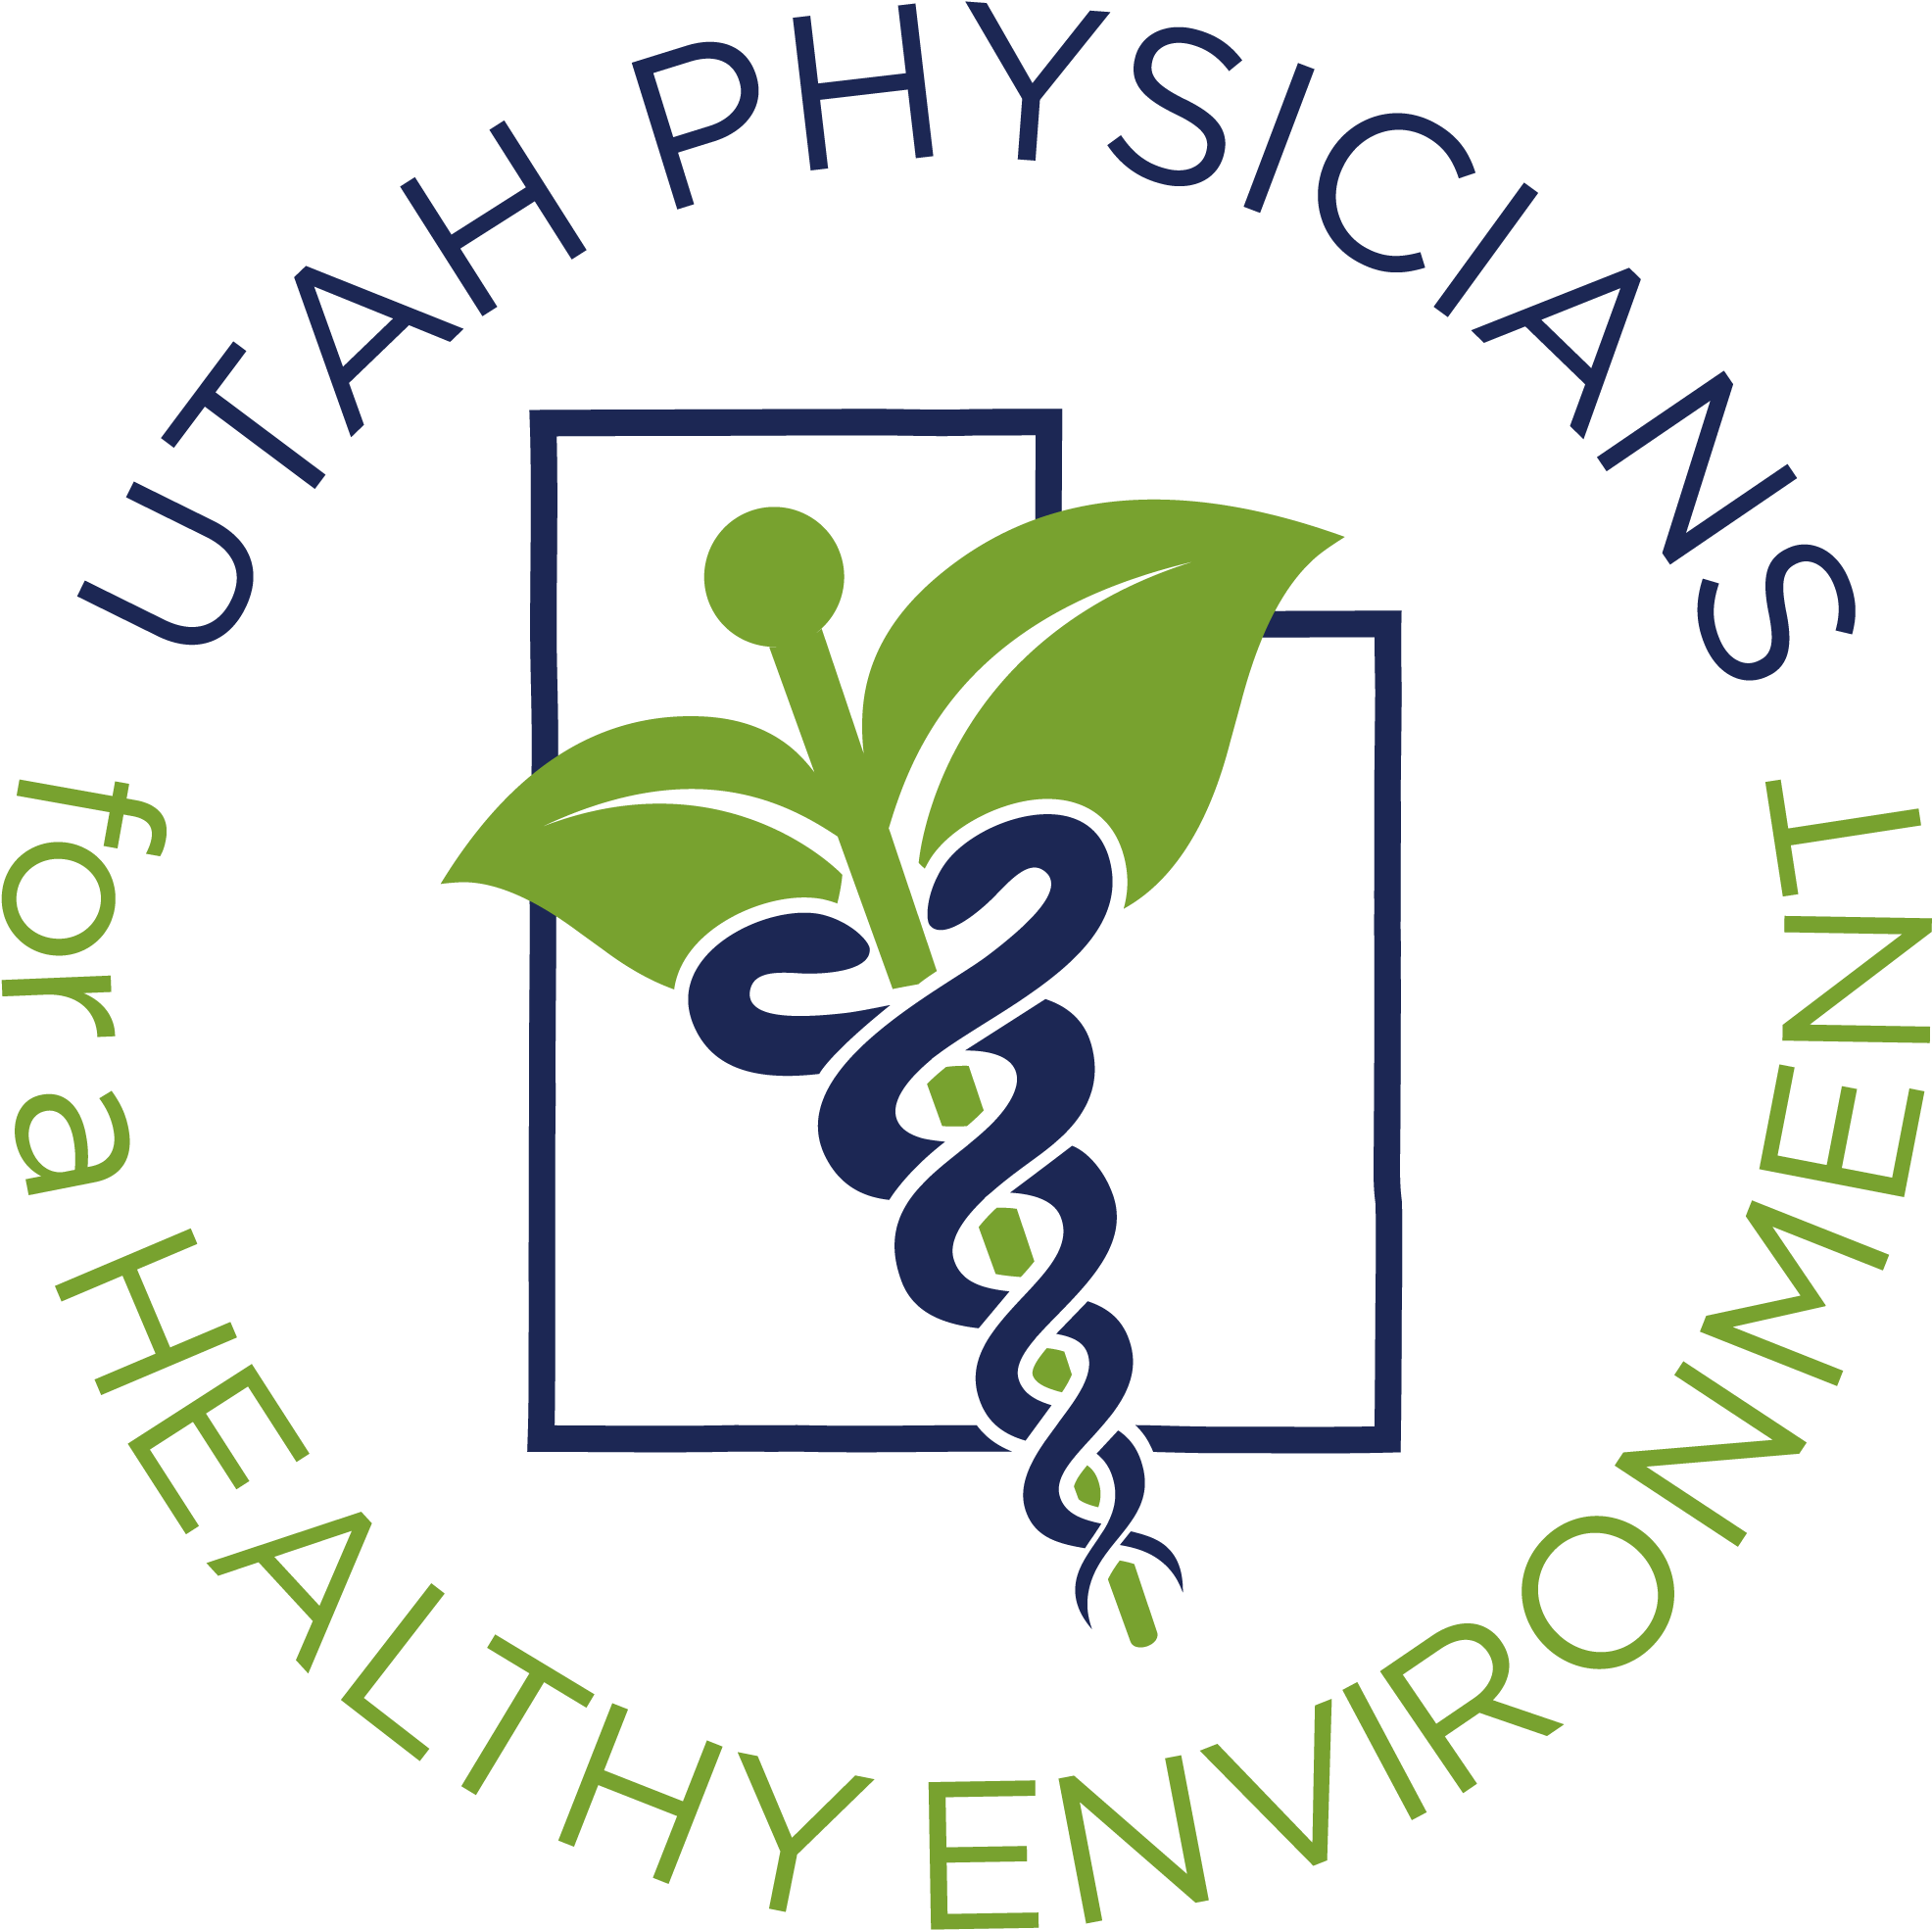 Press Conference By Utah Doctors On Recent Studies - Utah Physicians For A Healthy Environment (2000x2000)